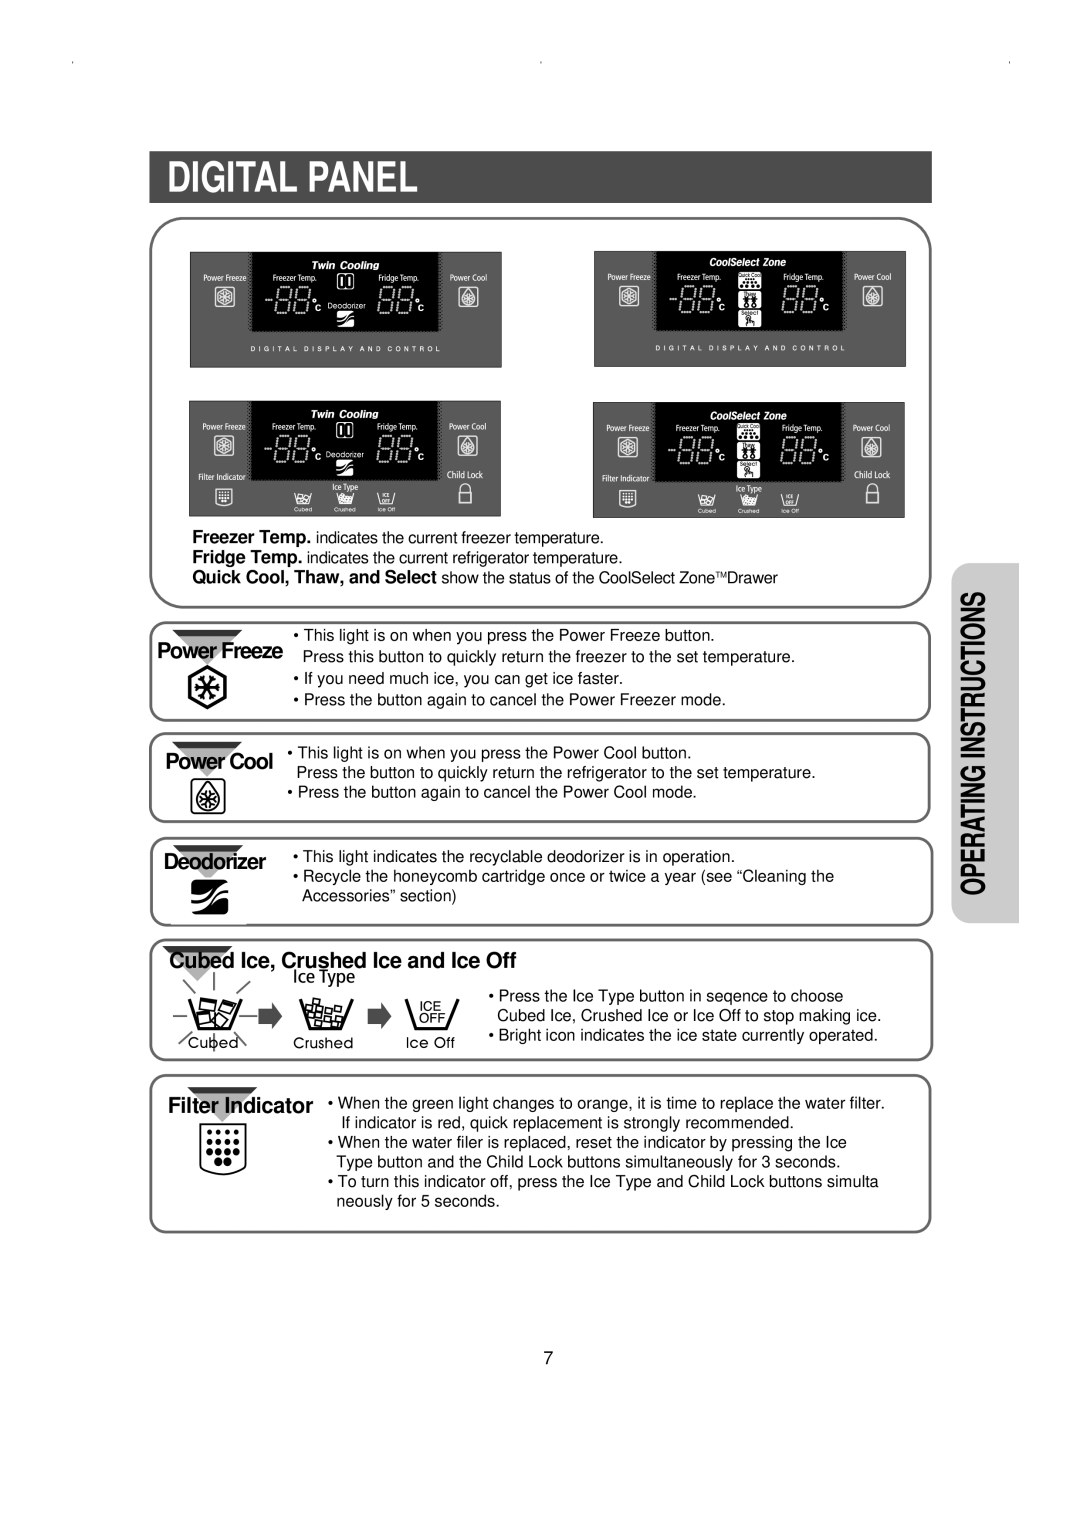 Samsung RS23KCSW owner manual Digital Panel, Power Cool Deodorizer, Cubed Ice, Crushed Ice and Ice Off, Power Freeze 